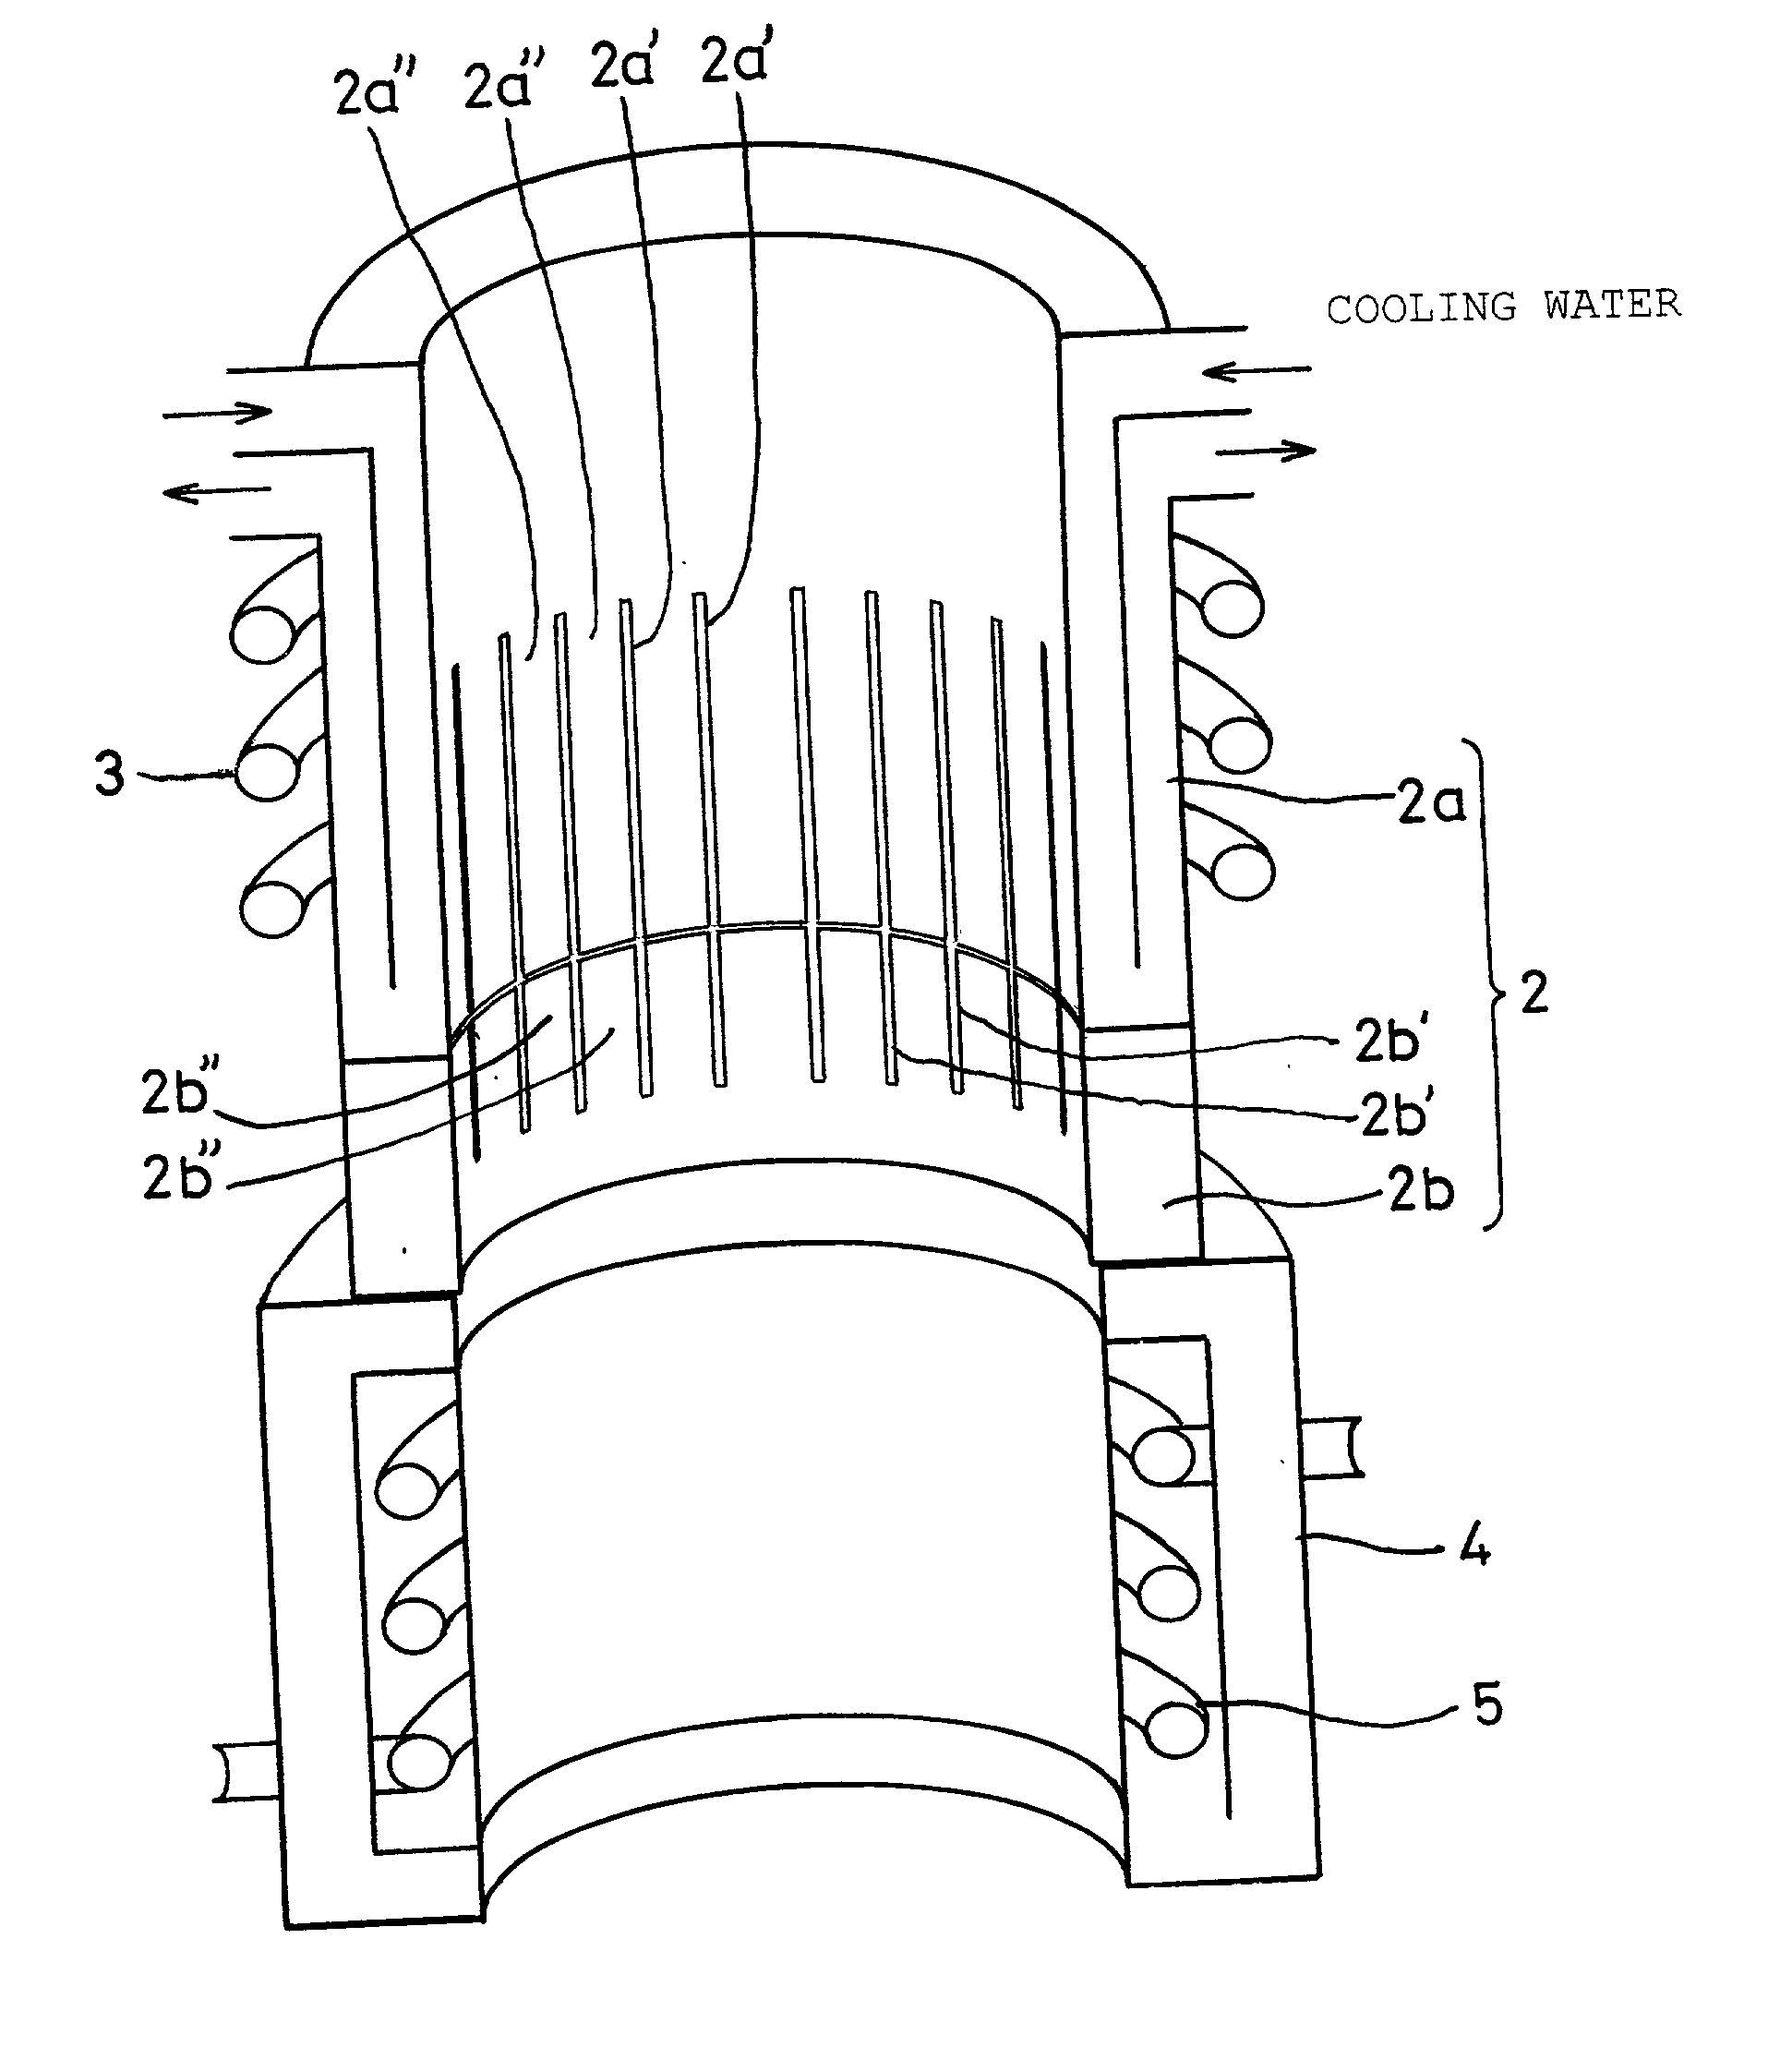 Electromagnetic induction casting apparatus